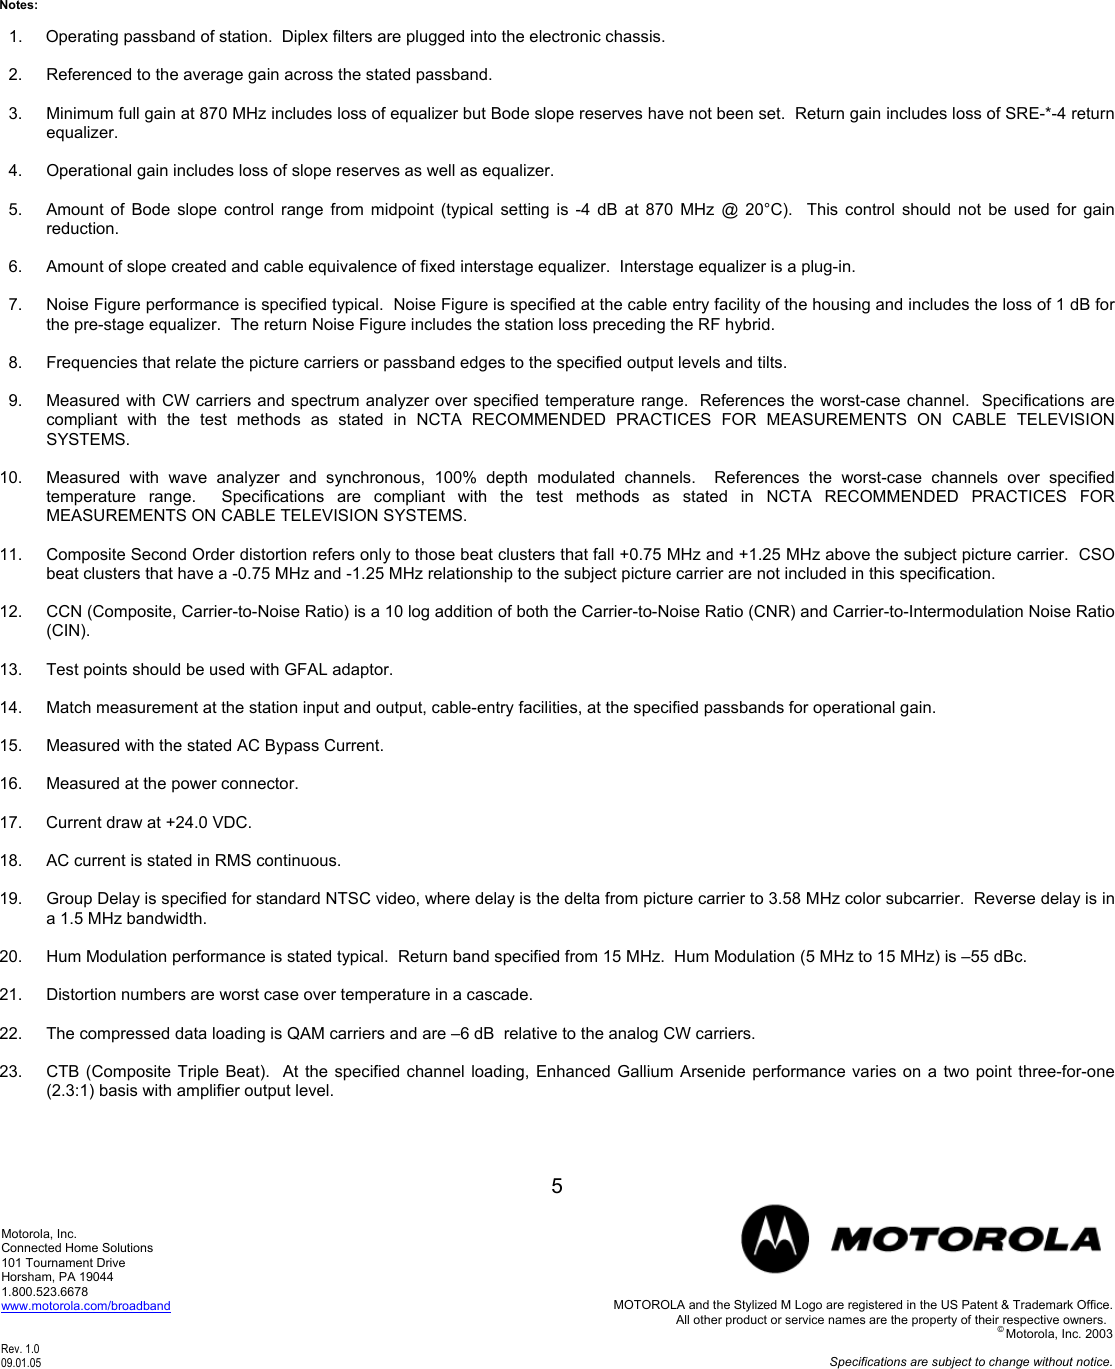 Page 5 of 9 - Motorola Motorola-Ble87-Users-Manual BLE_Catalog_Specifications_9-1-05